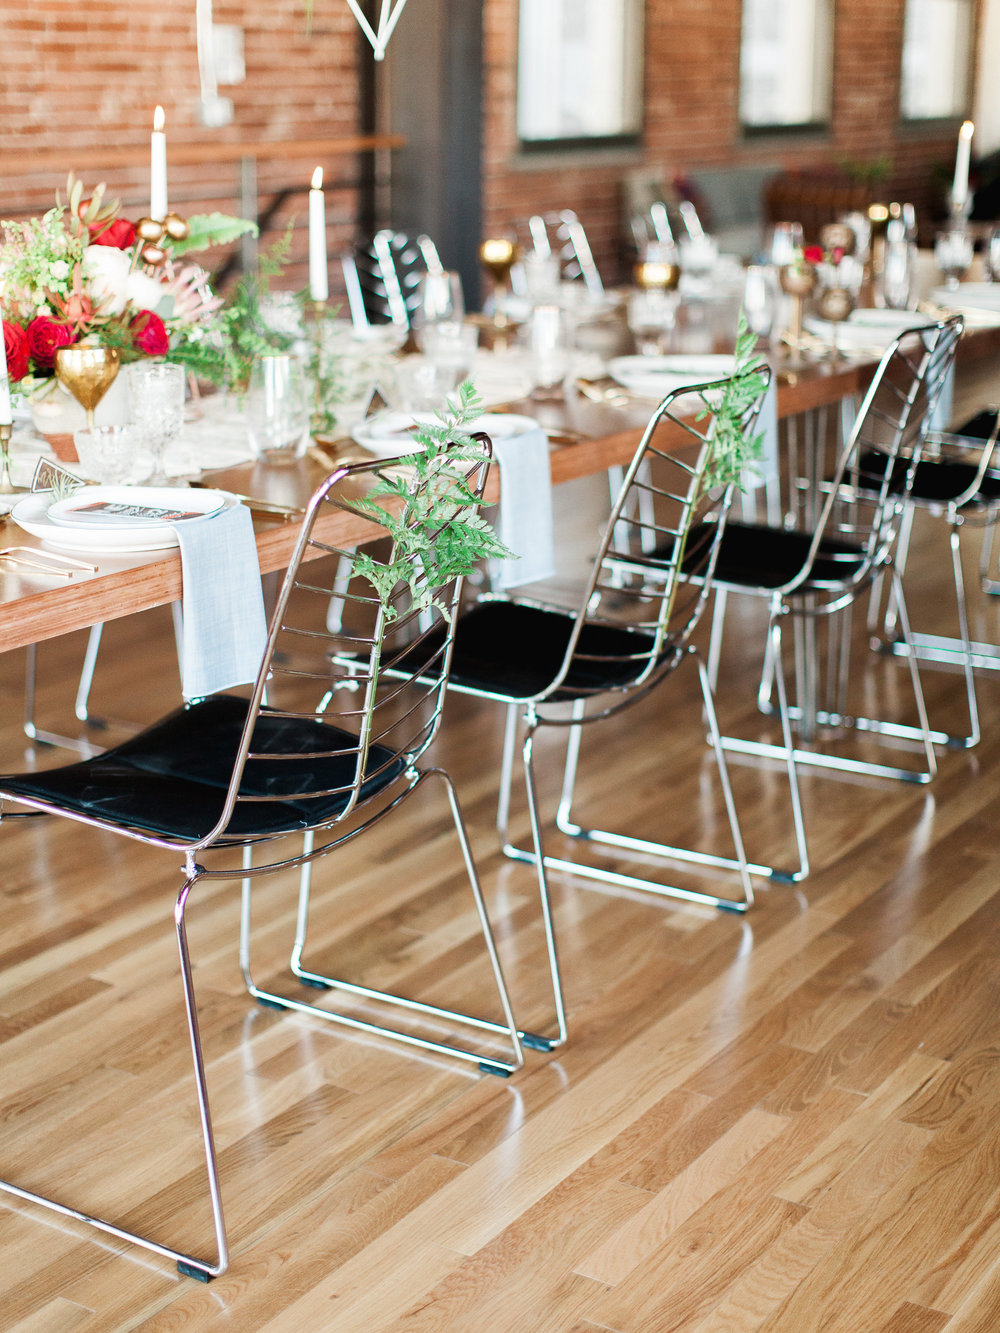 Wedding at Howl in Long Beach | Green Apple Event Co | Southern California Wedding Design | Sposto Photography